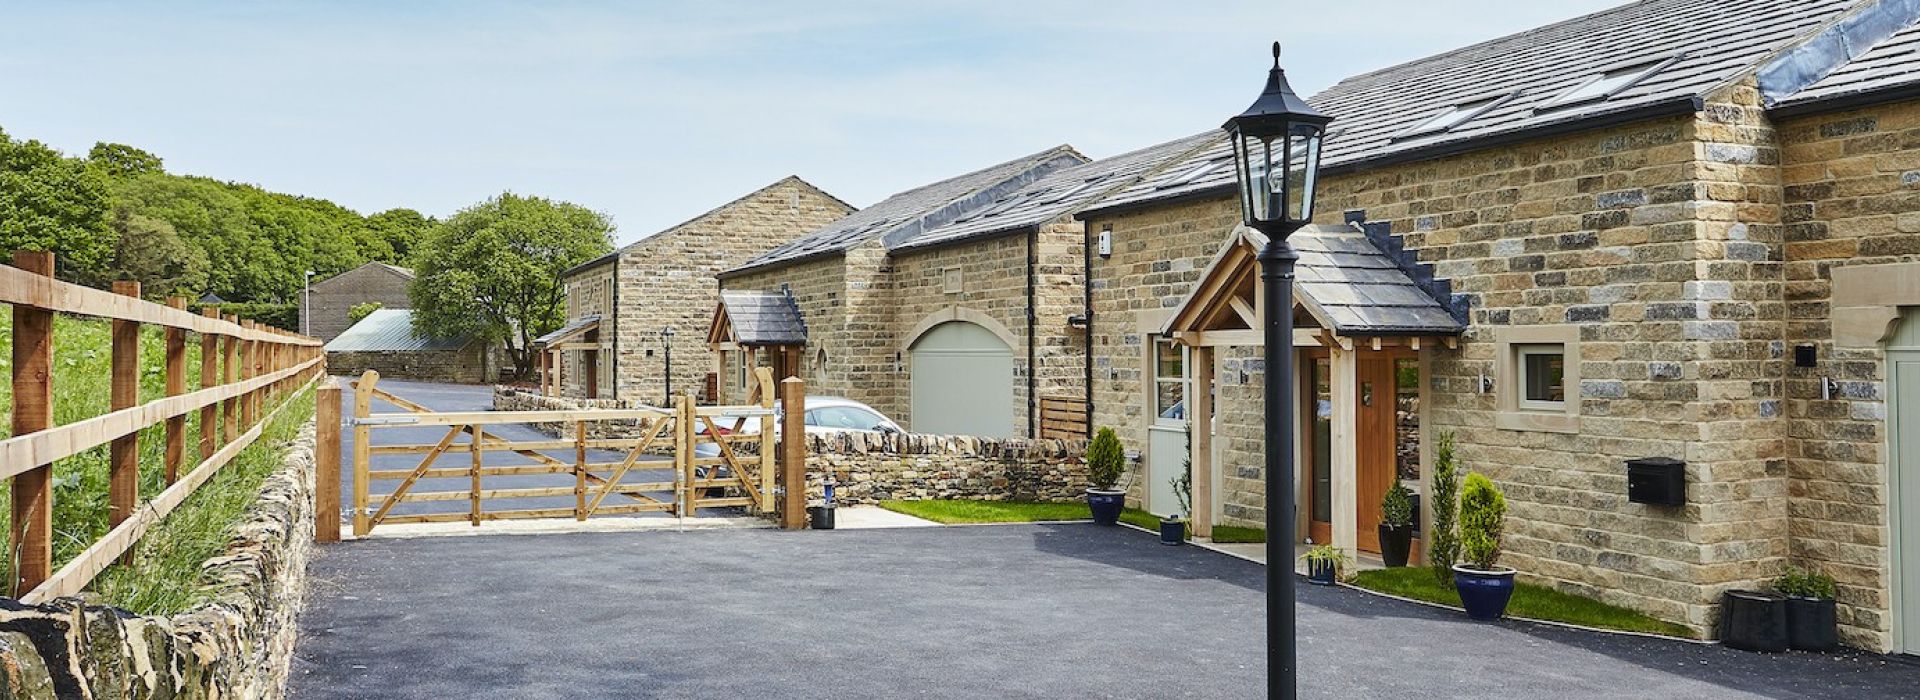 A selection of past new build homes built by Kingsman Homes, Holmfirth